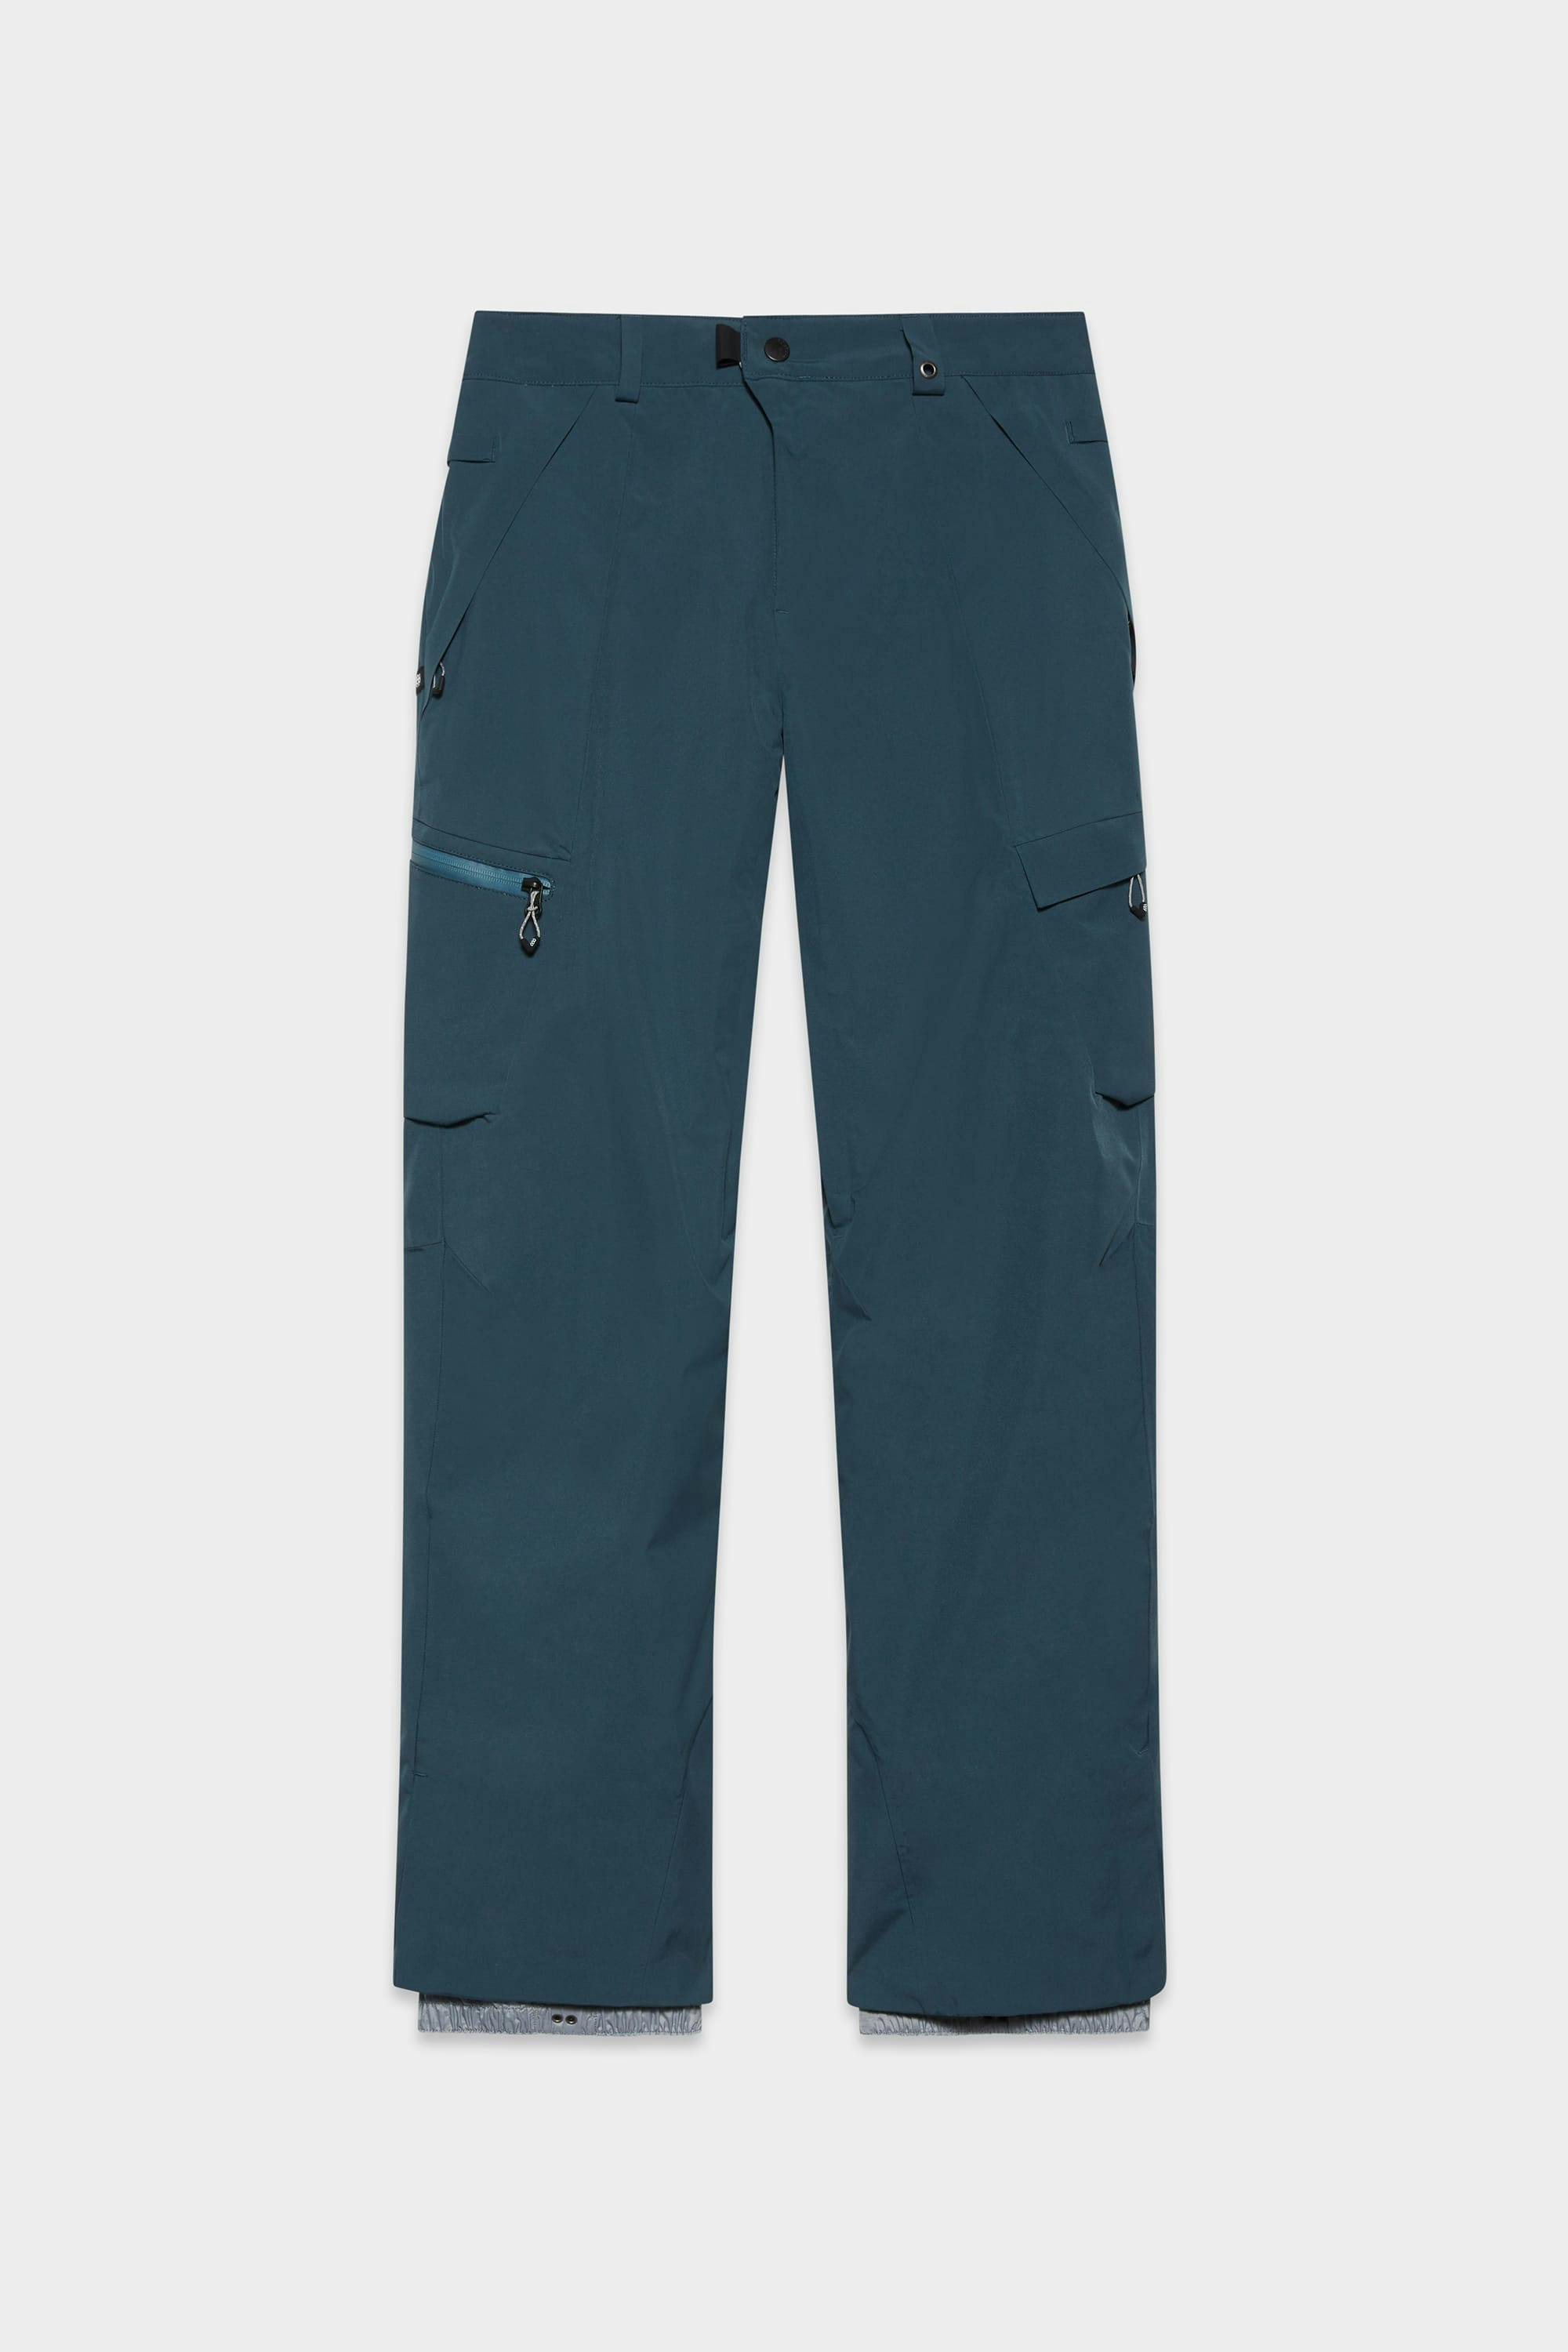 686 Women's Geode Thermagraph Pant